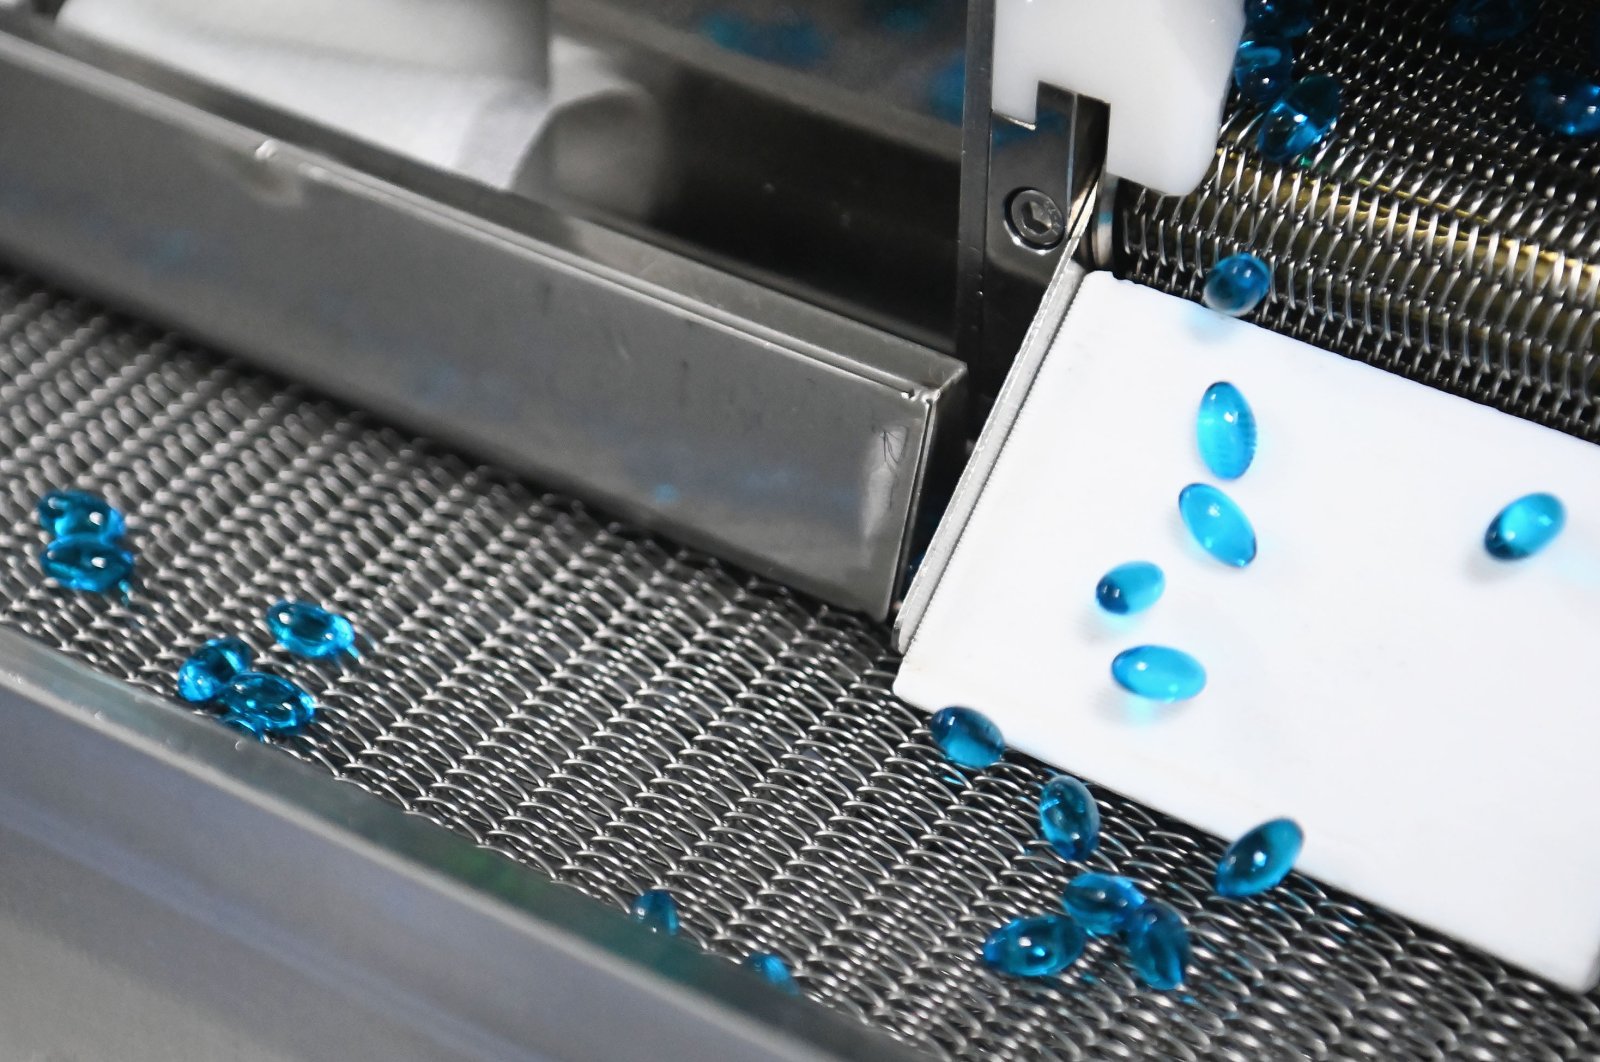 Capsules for treating cold move along a conveyor at a factory in Wuhan, Hubei province, China, Aug. 11, 2021. (Getty Images )